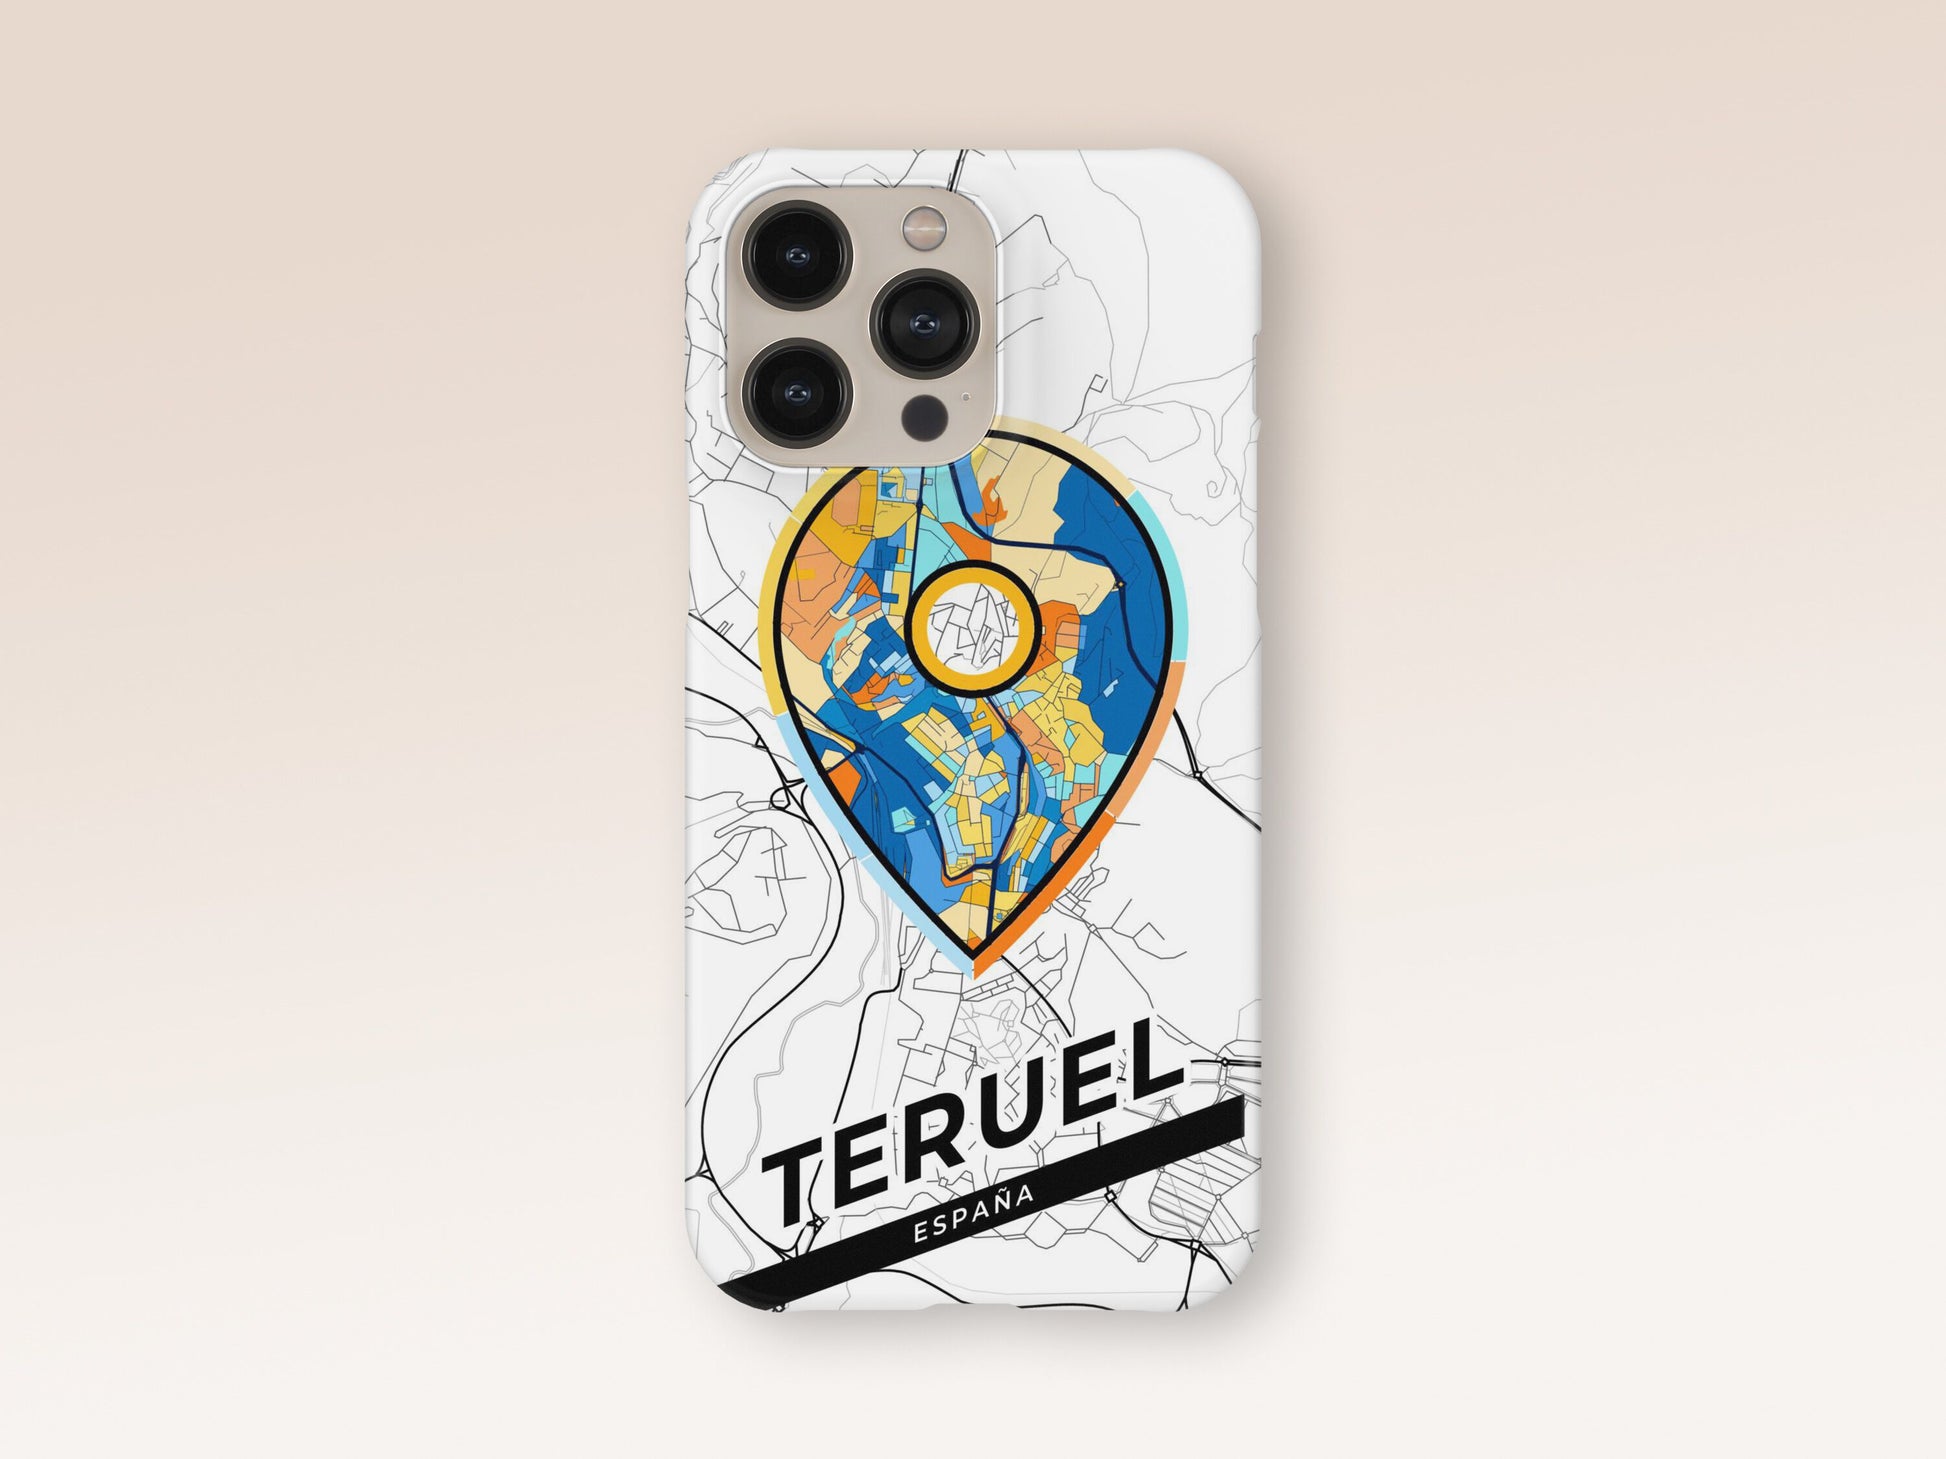 Teruel Spain slim phone case with colorful icon. Birthday, wedding or housewarming gift. Couple match cases. 1